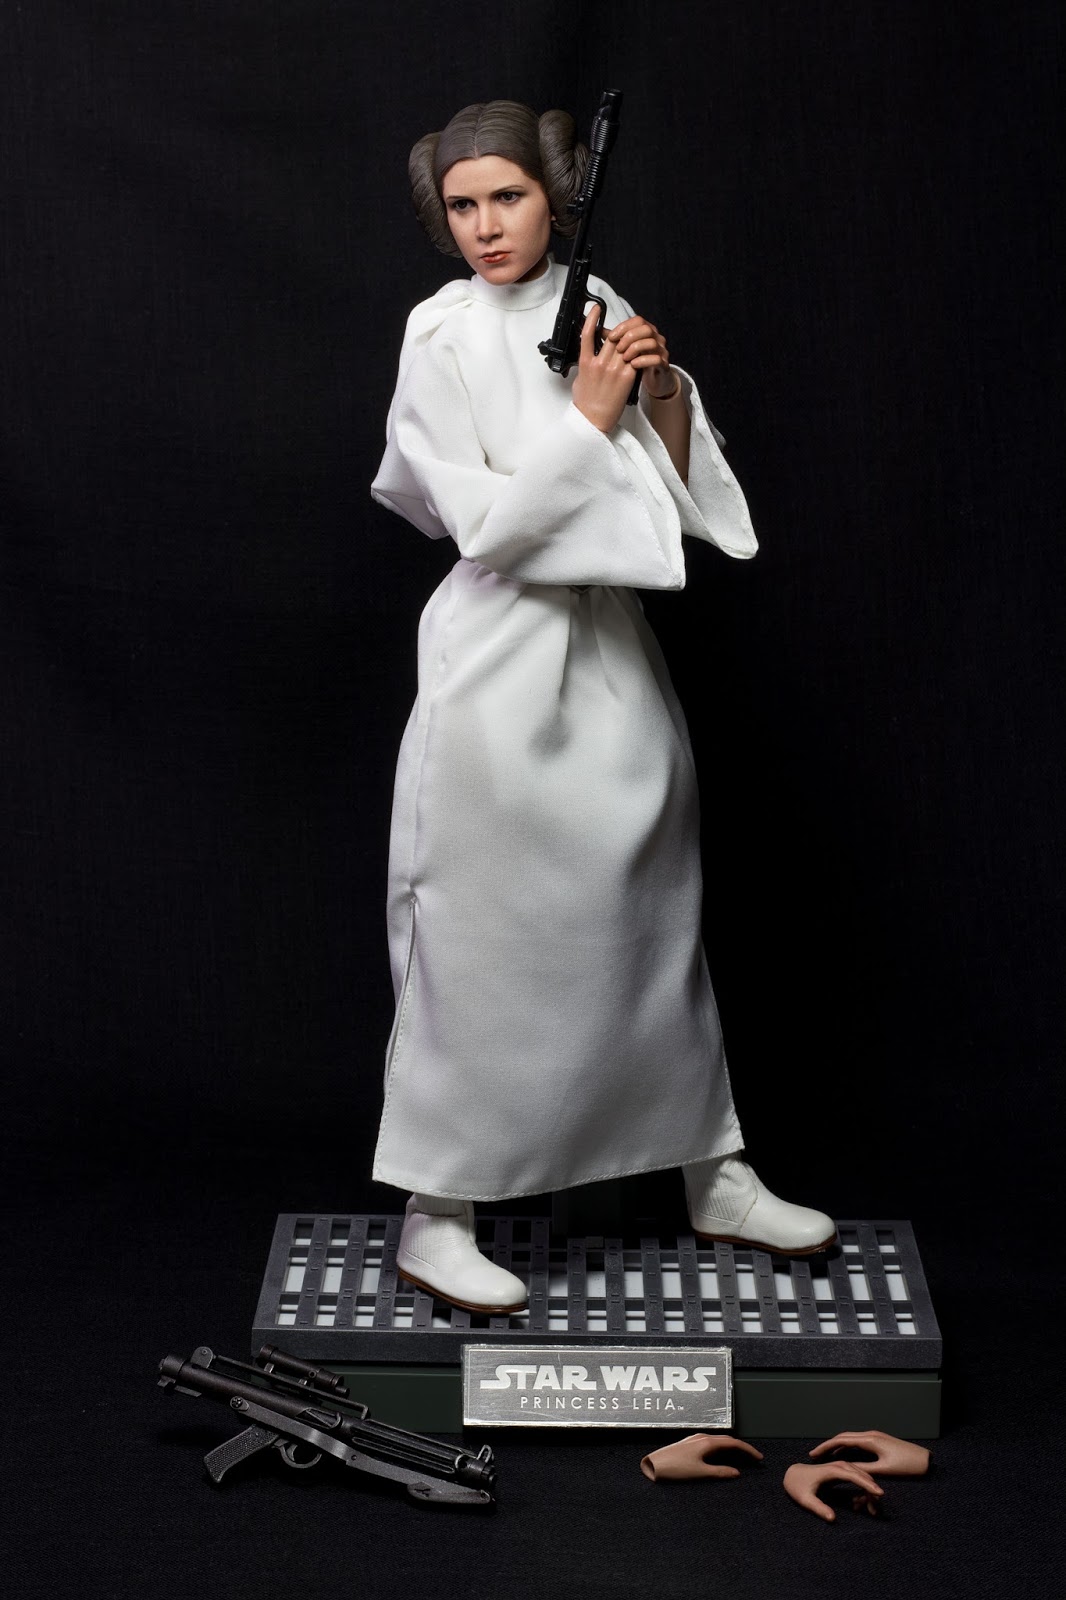 Doons Dungeon 16 Hot Toys Star Wars Princess Leia Figure Review 